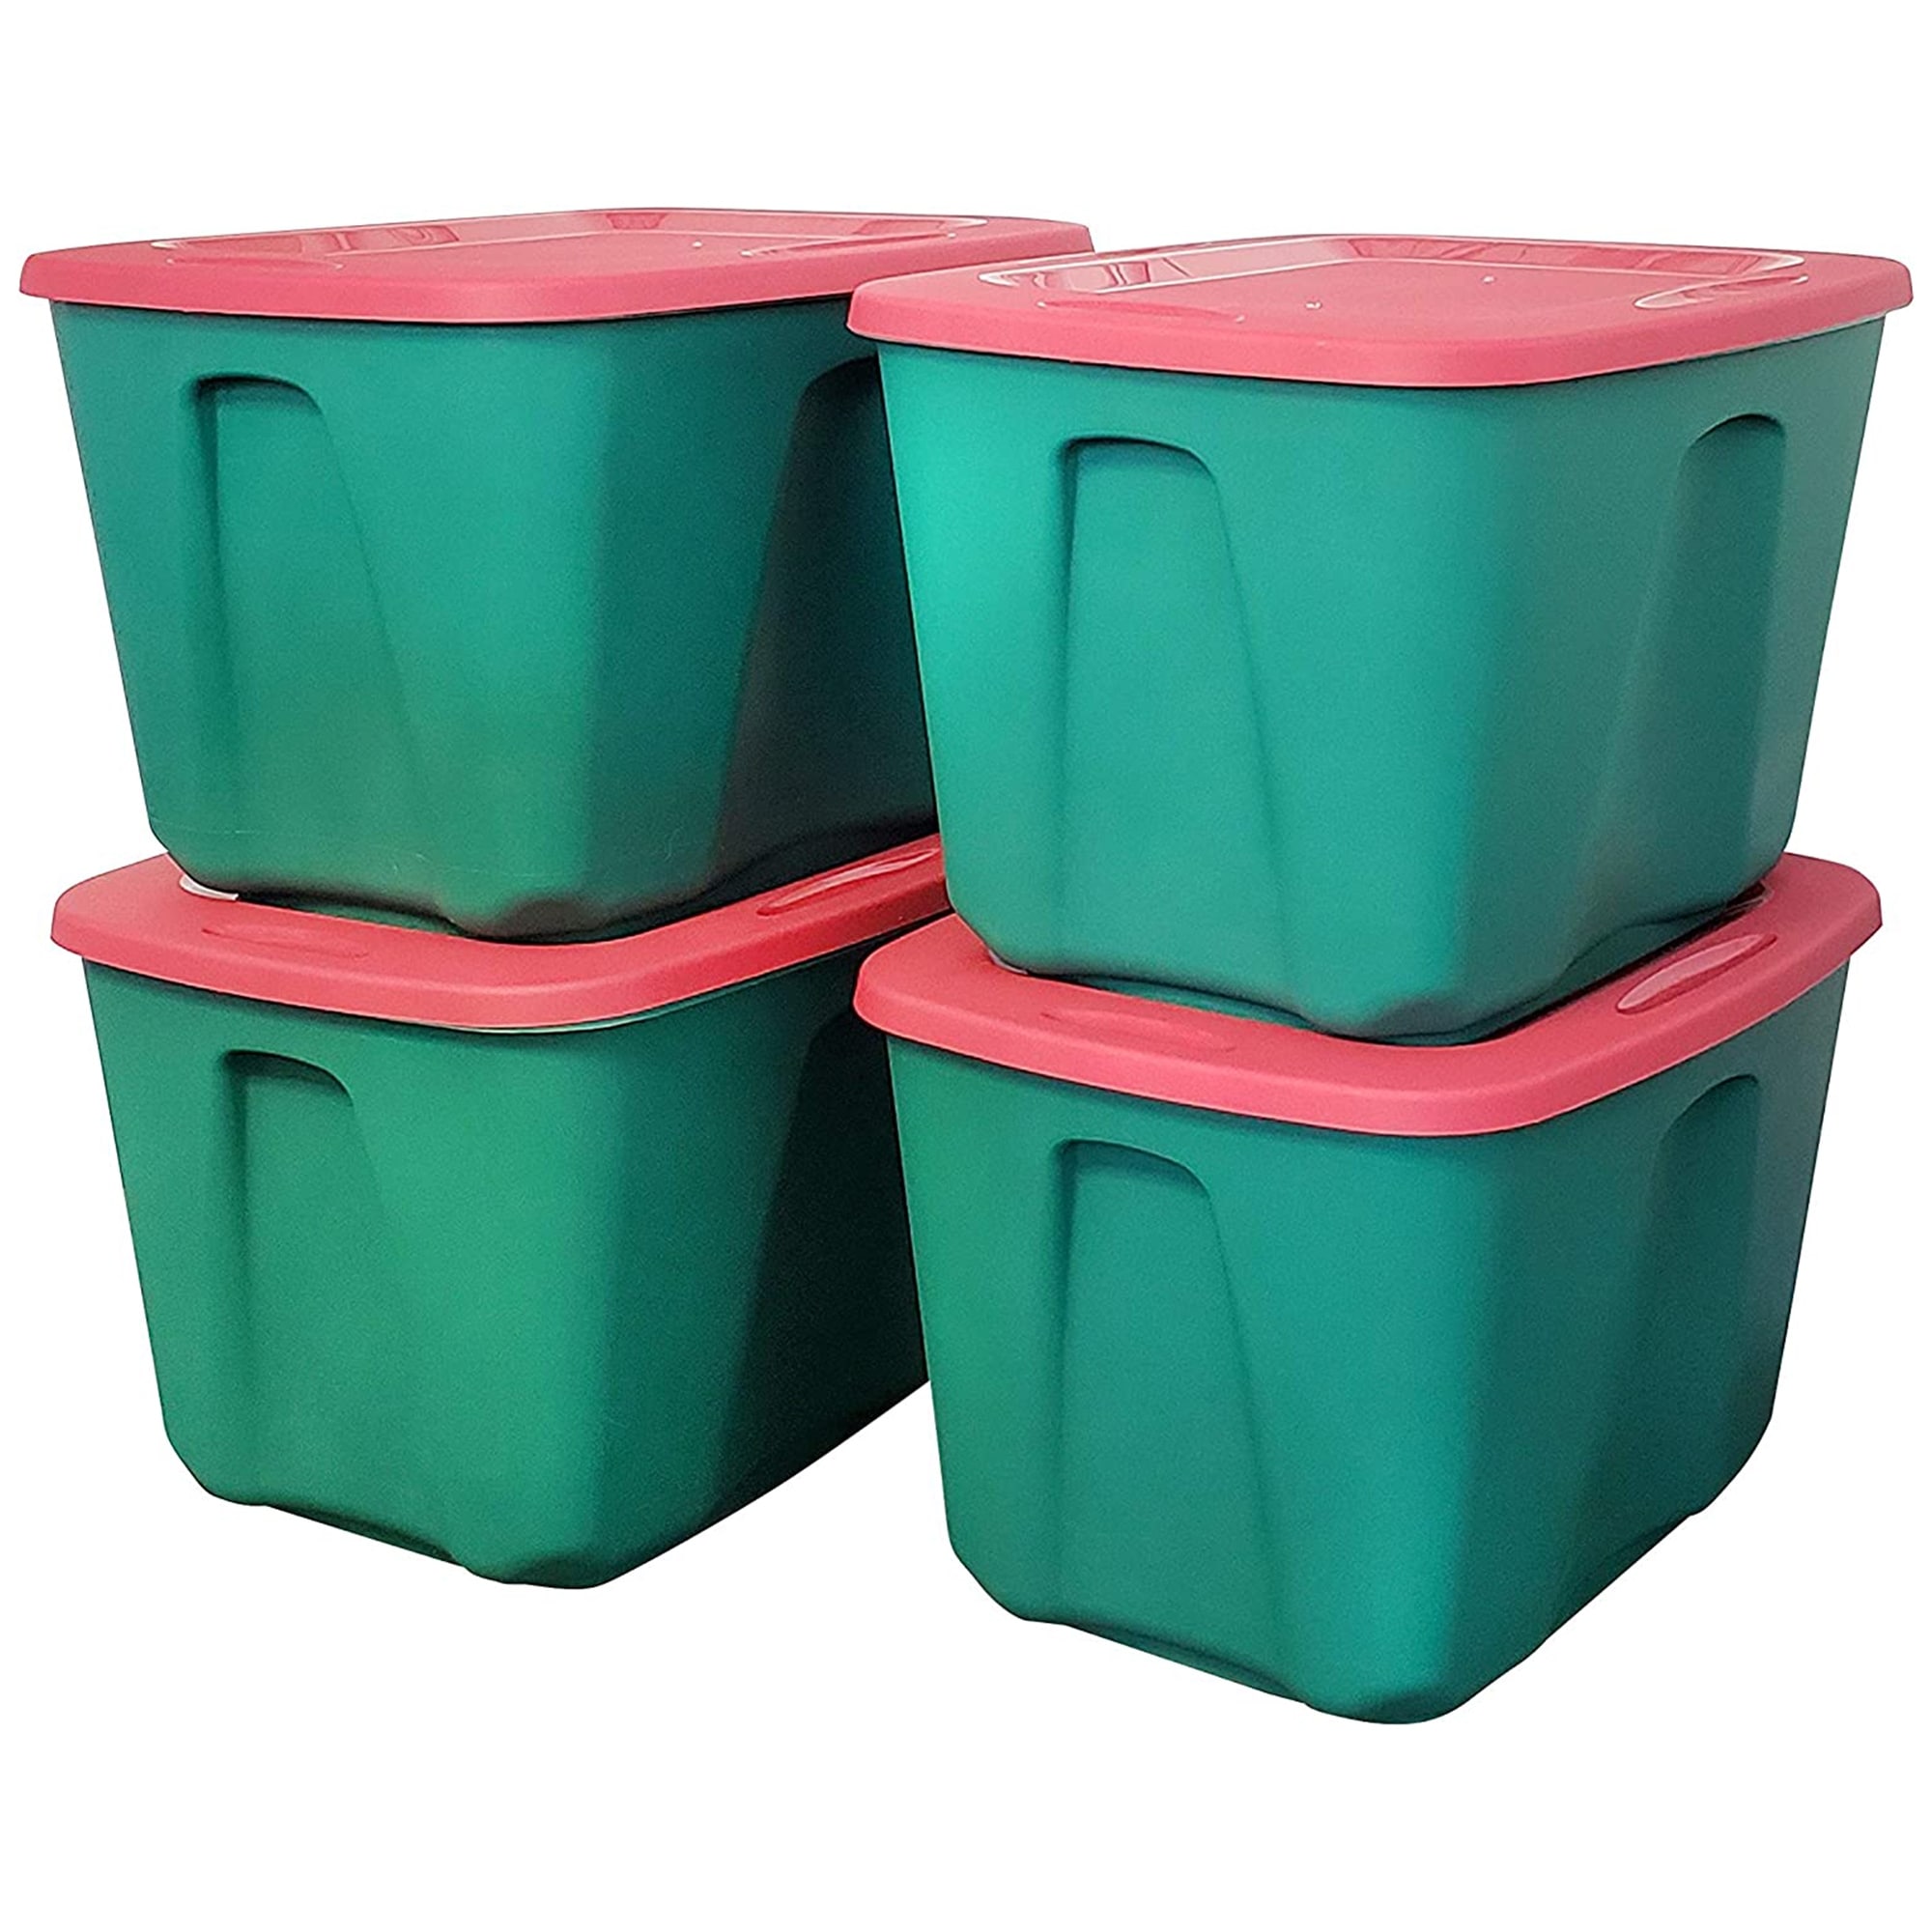 https://ak1.ostkcdn.com/images/products/is/images/direct/46fdc8388219eaf490435afd8ee64ef54a53ea69/HOMZ-18-Gallon-Heavy-Duty-Plastic-Holiday-Storage-Totes%2C-Green-Red-%284-Pack%29.jpg